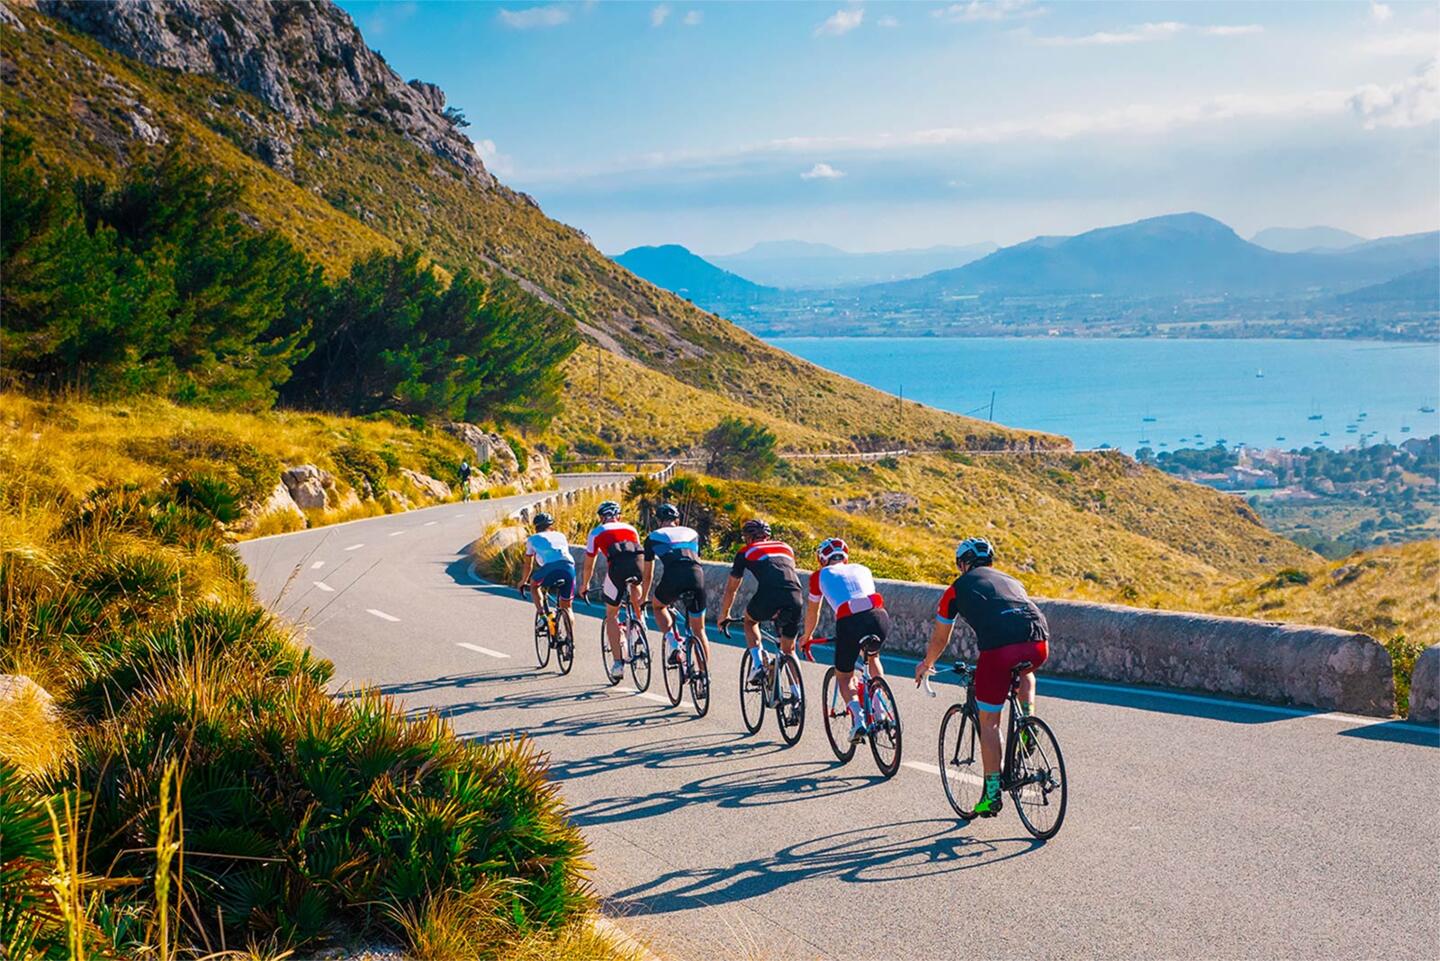 Competitive cyclists on a winding mountain road during the Tour de France, with a stunning view of the bay below and the surrounding nature, experience the Tour de France by staying at Appart'City, the ideal accommodation for cycling fans.